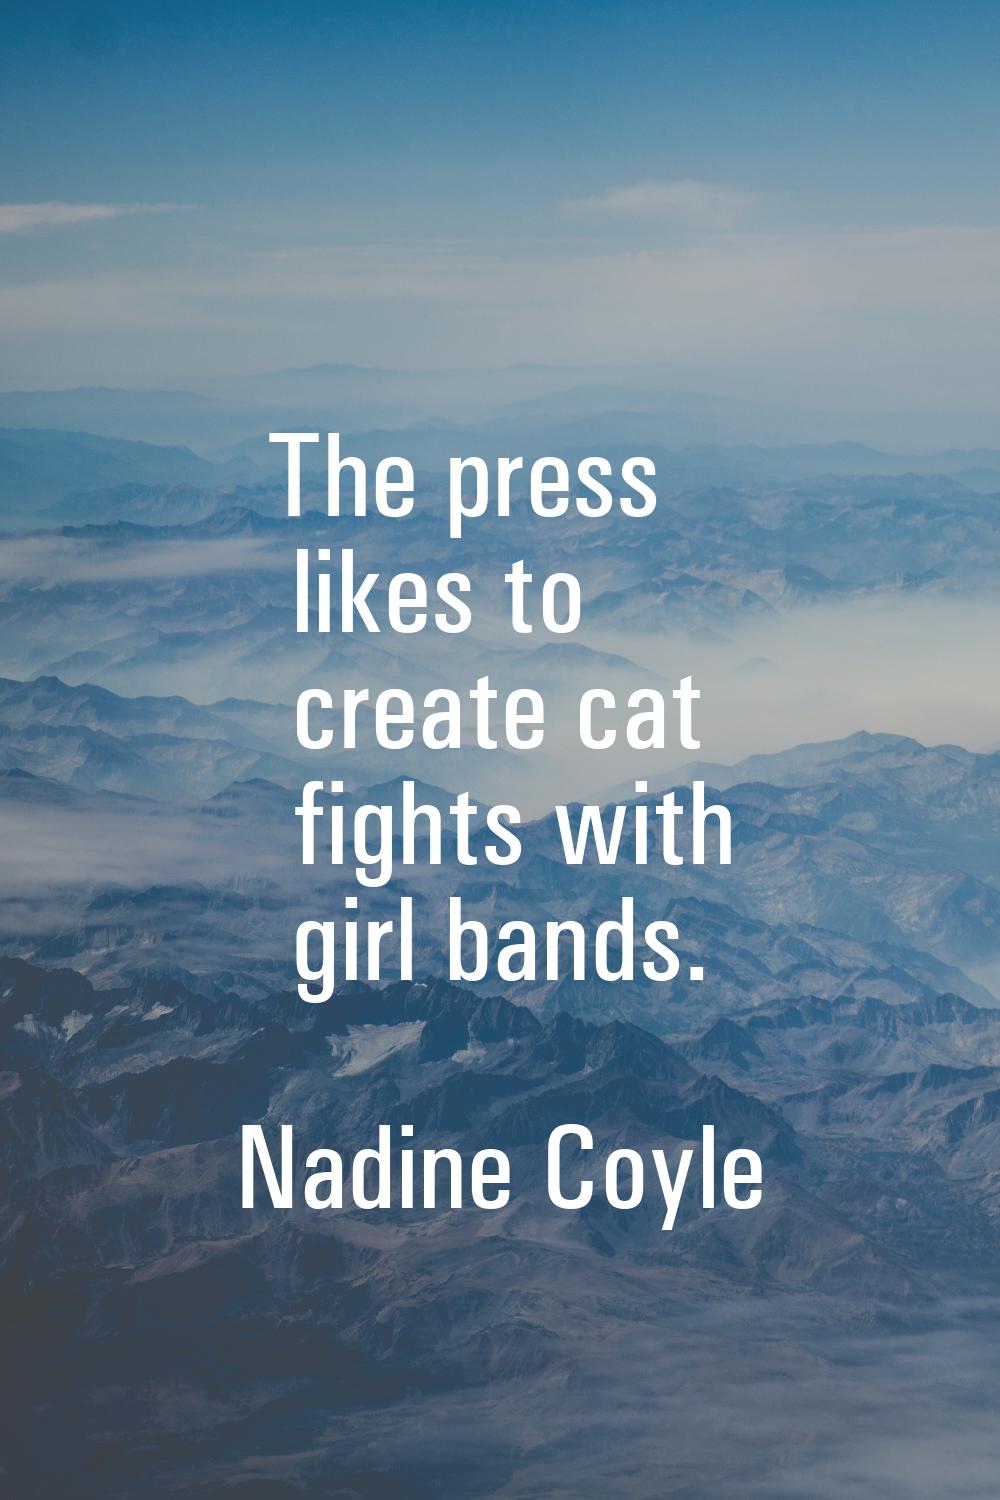 The press likes to create cat fights with girl bands.